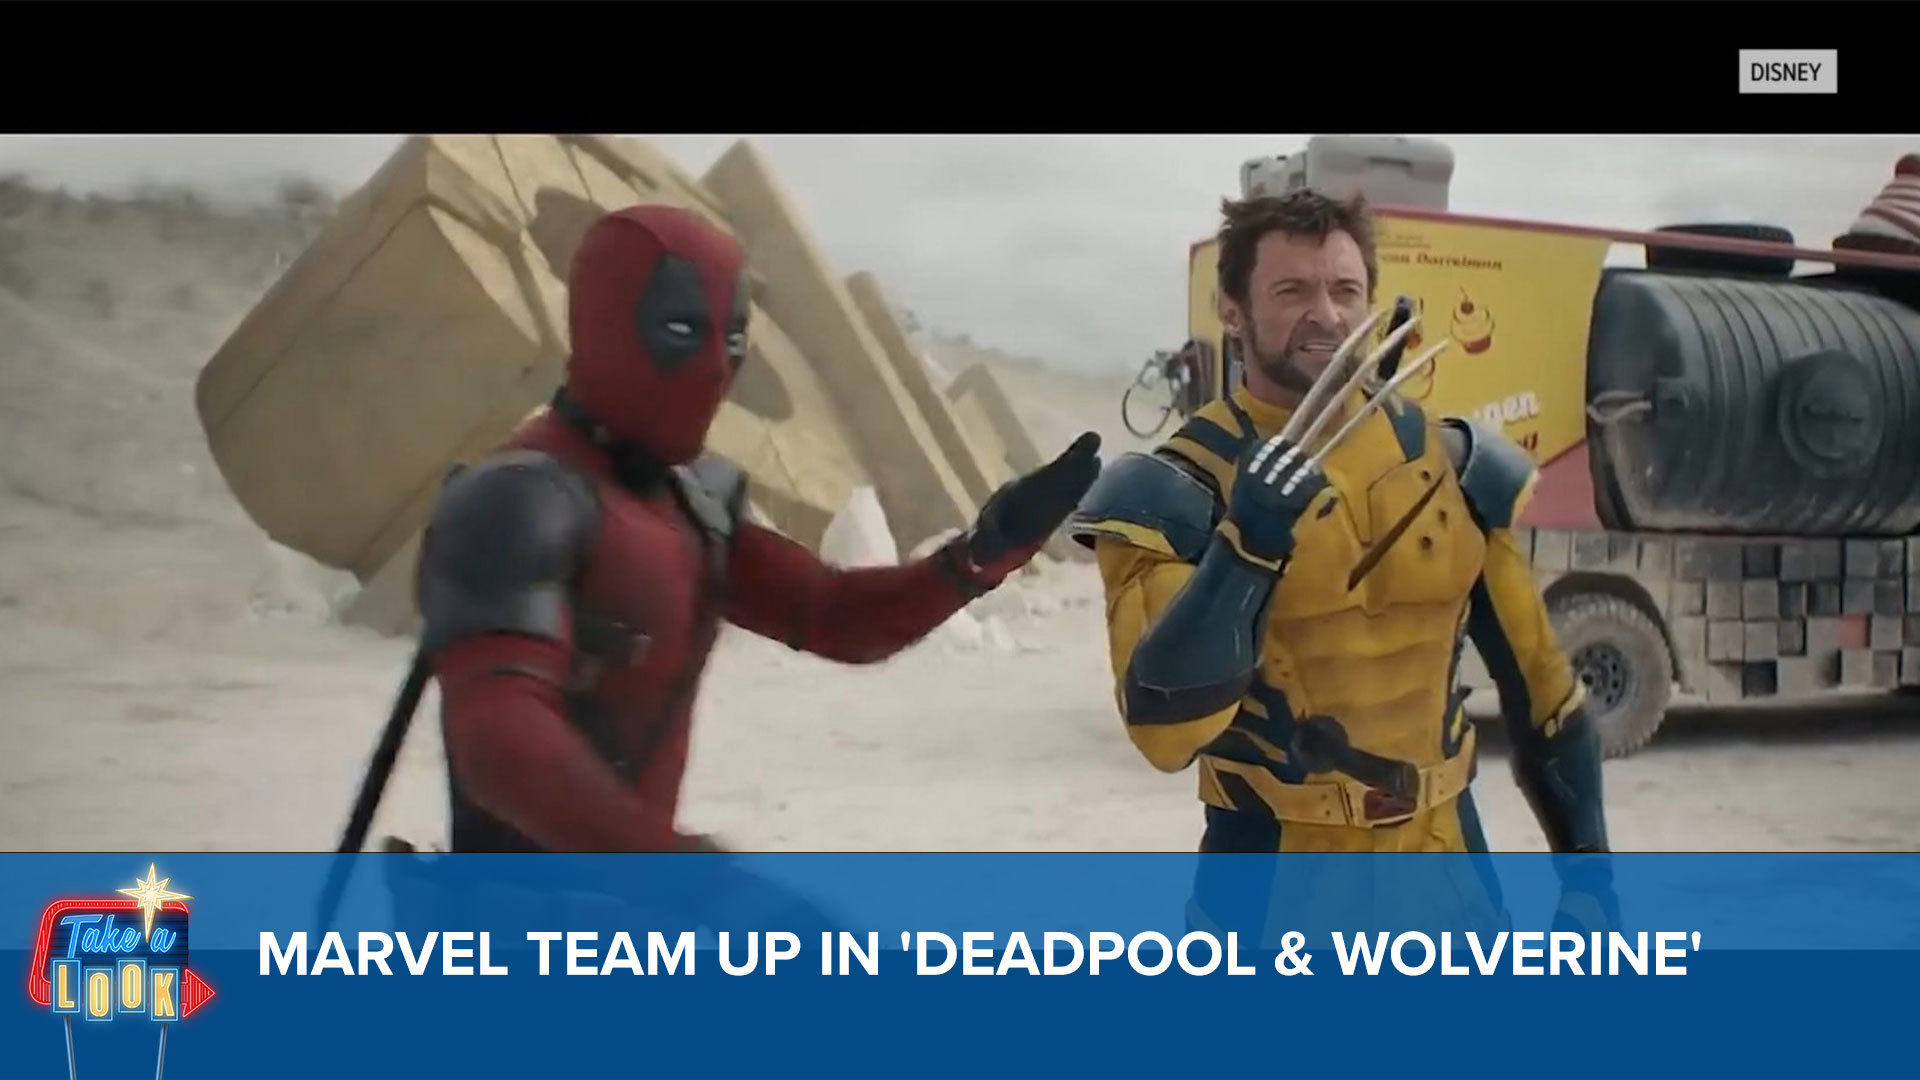 This week on “Take a Look” with Mark S. Allen: Two Marvel characters team up in “Deadpool & Wolverine.” Mark catches a ride with a breakout star from the franchise.